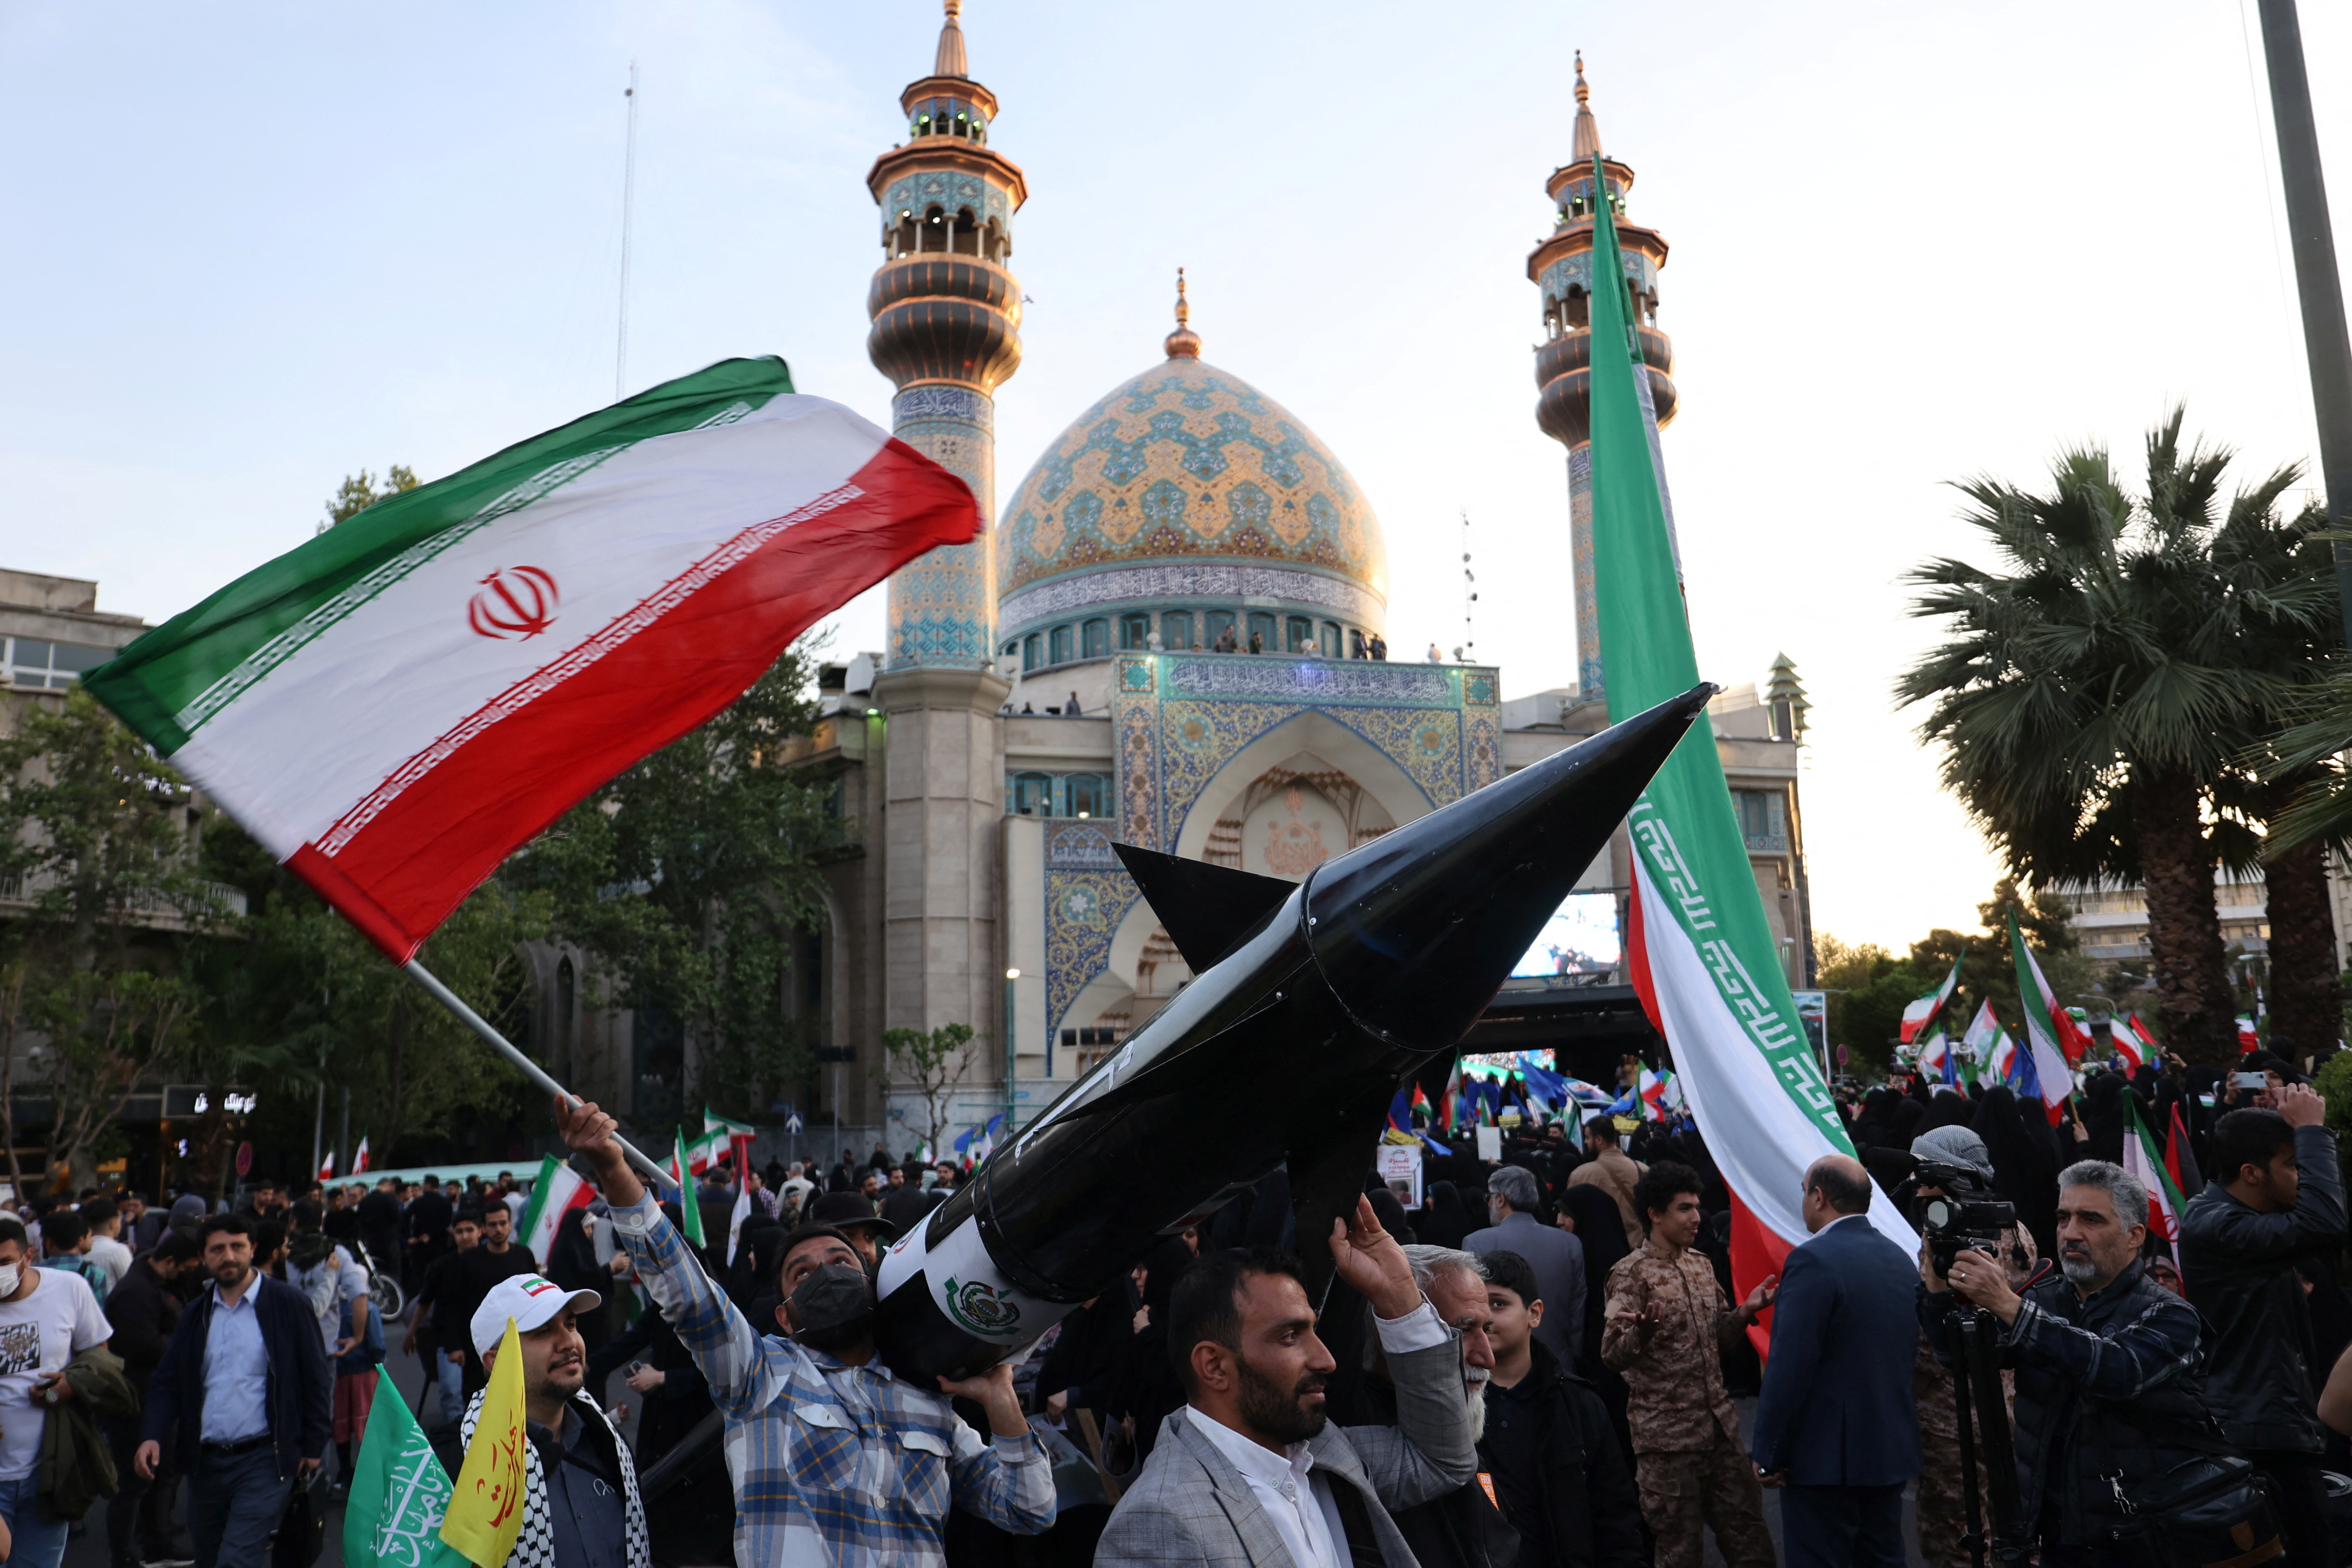 Iranians carry a model of a missile during a celebration following the IRGC attack on Israel, in Tehran